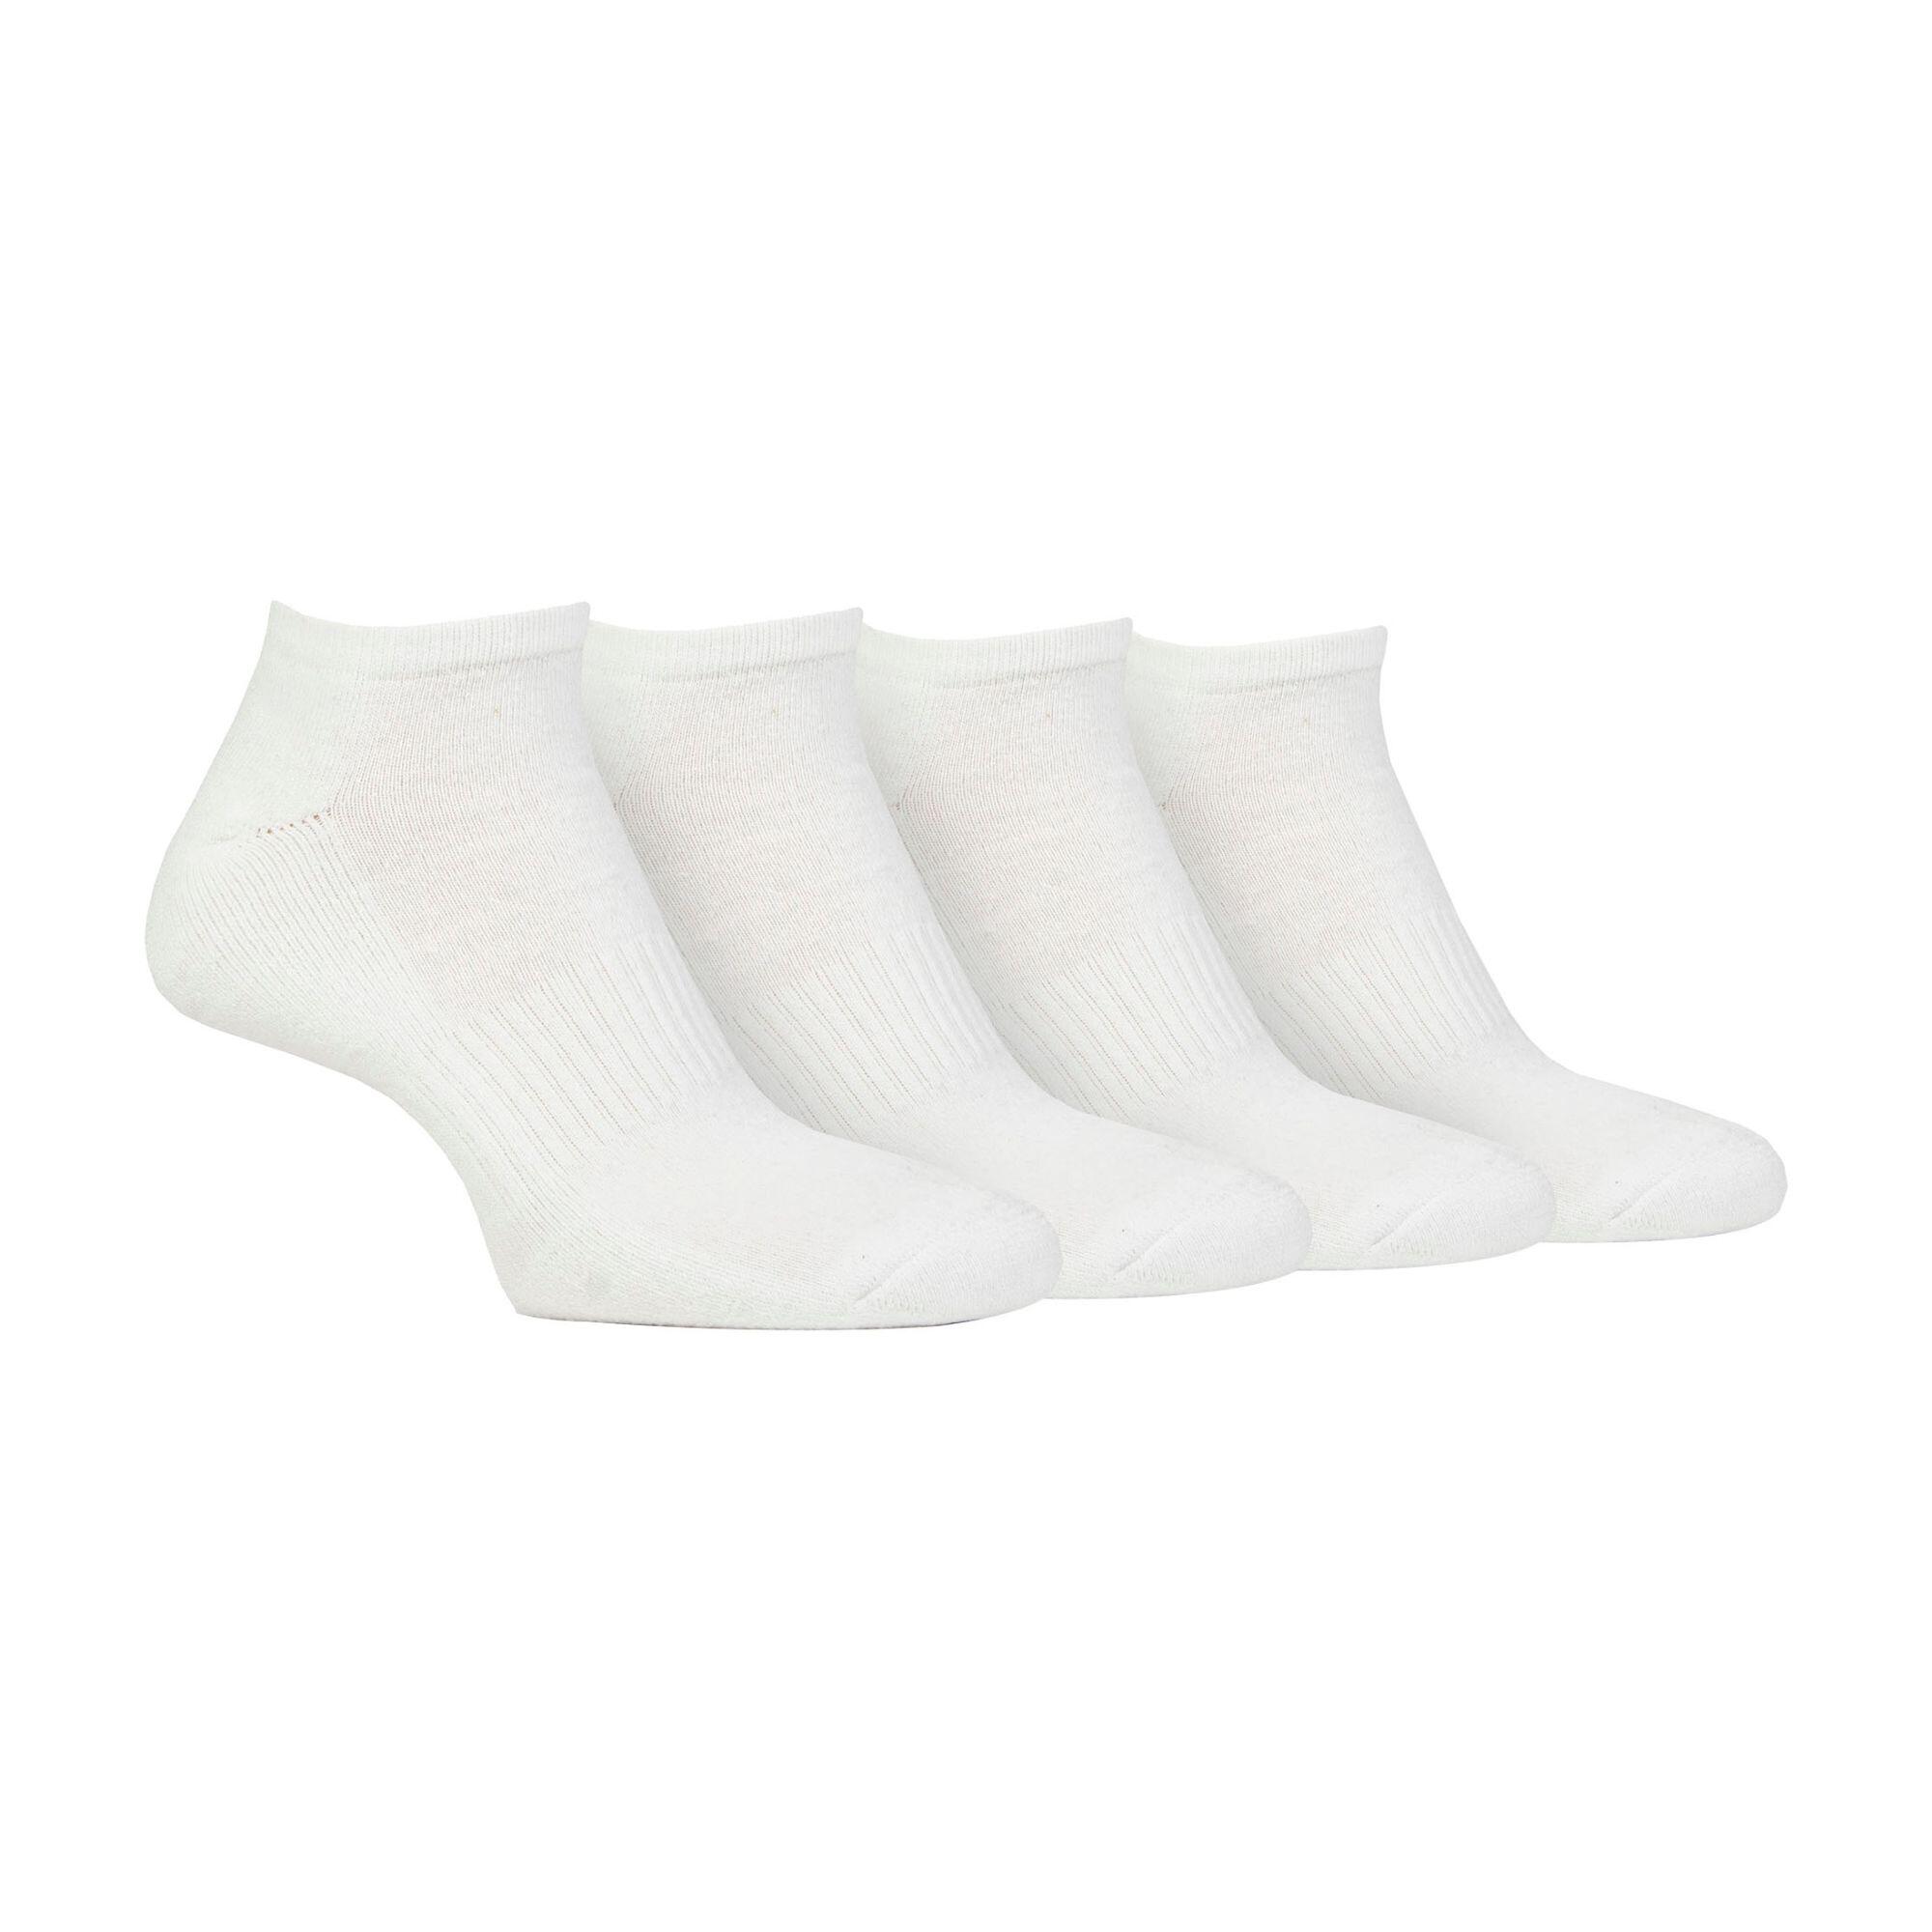 4 Pairs Mens Cushioned Breathable Trainer Socks 1/3